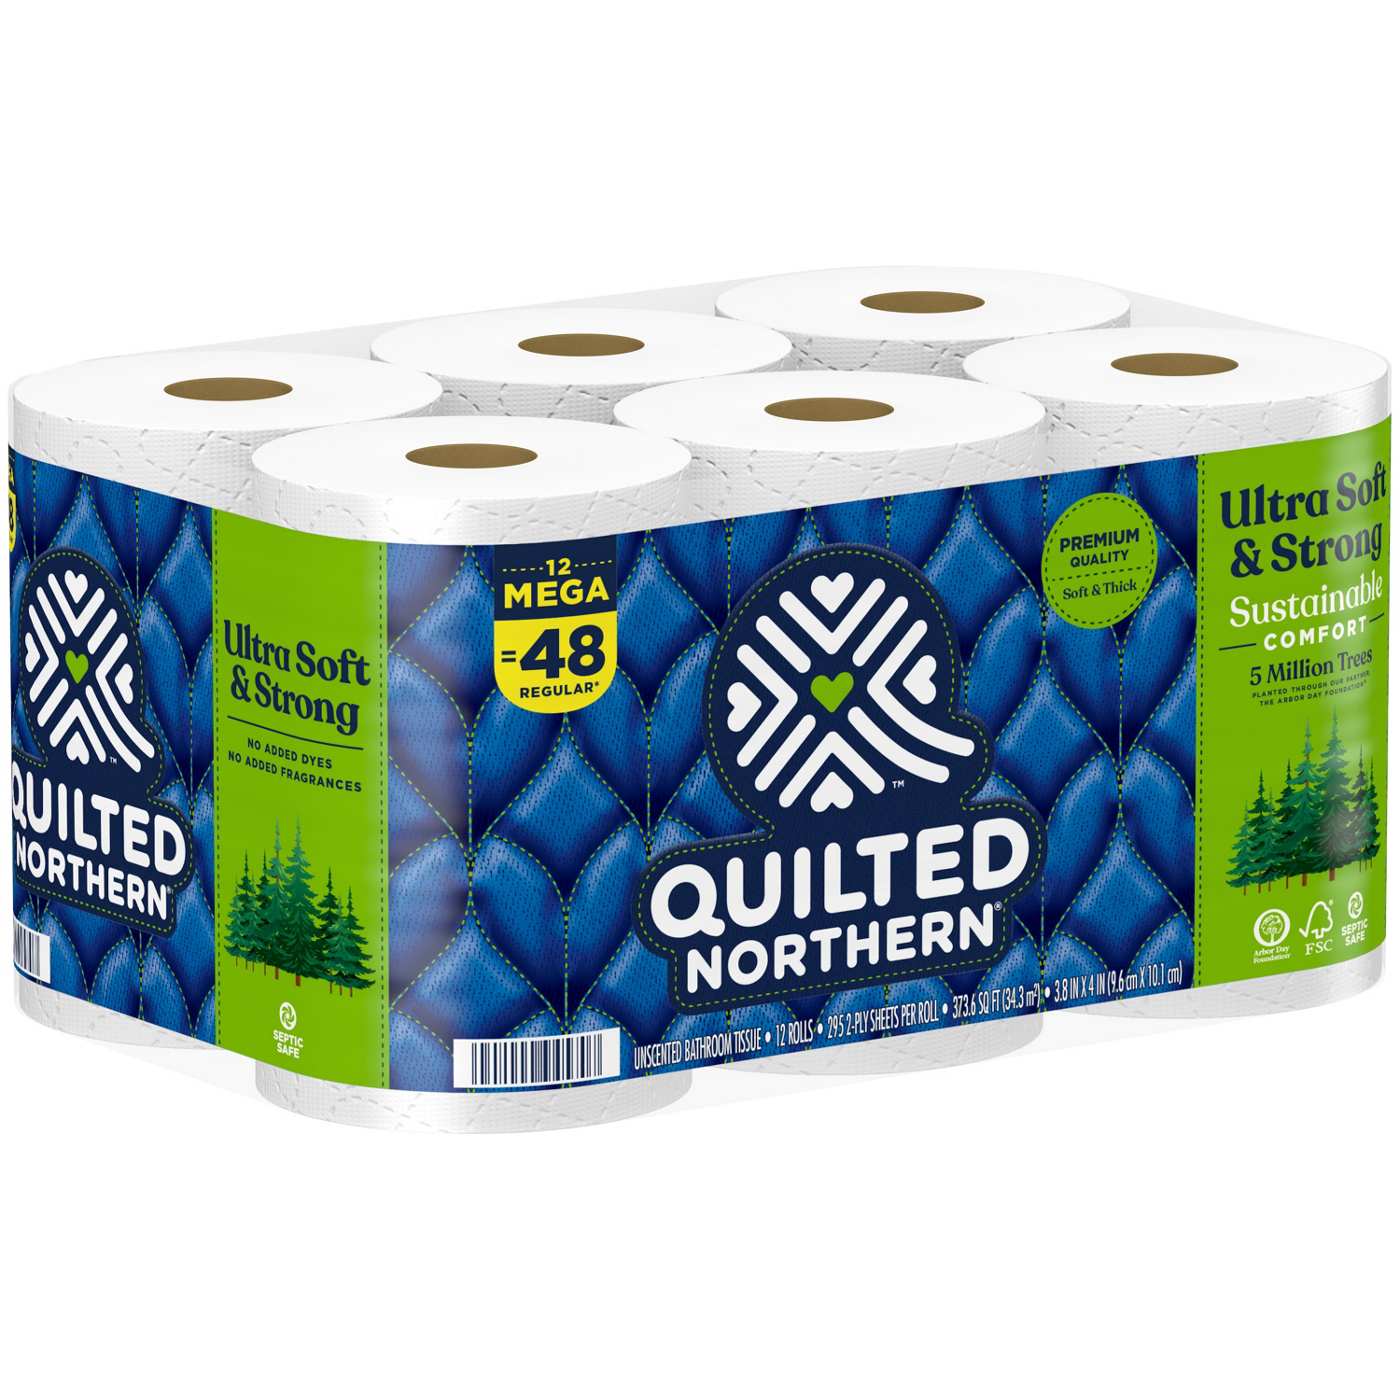 Quilted Northern Ultra Soft & Strong Toilet Paper